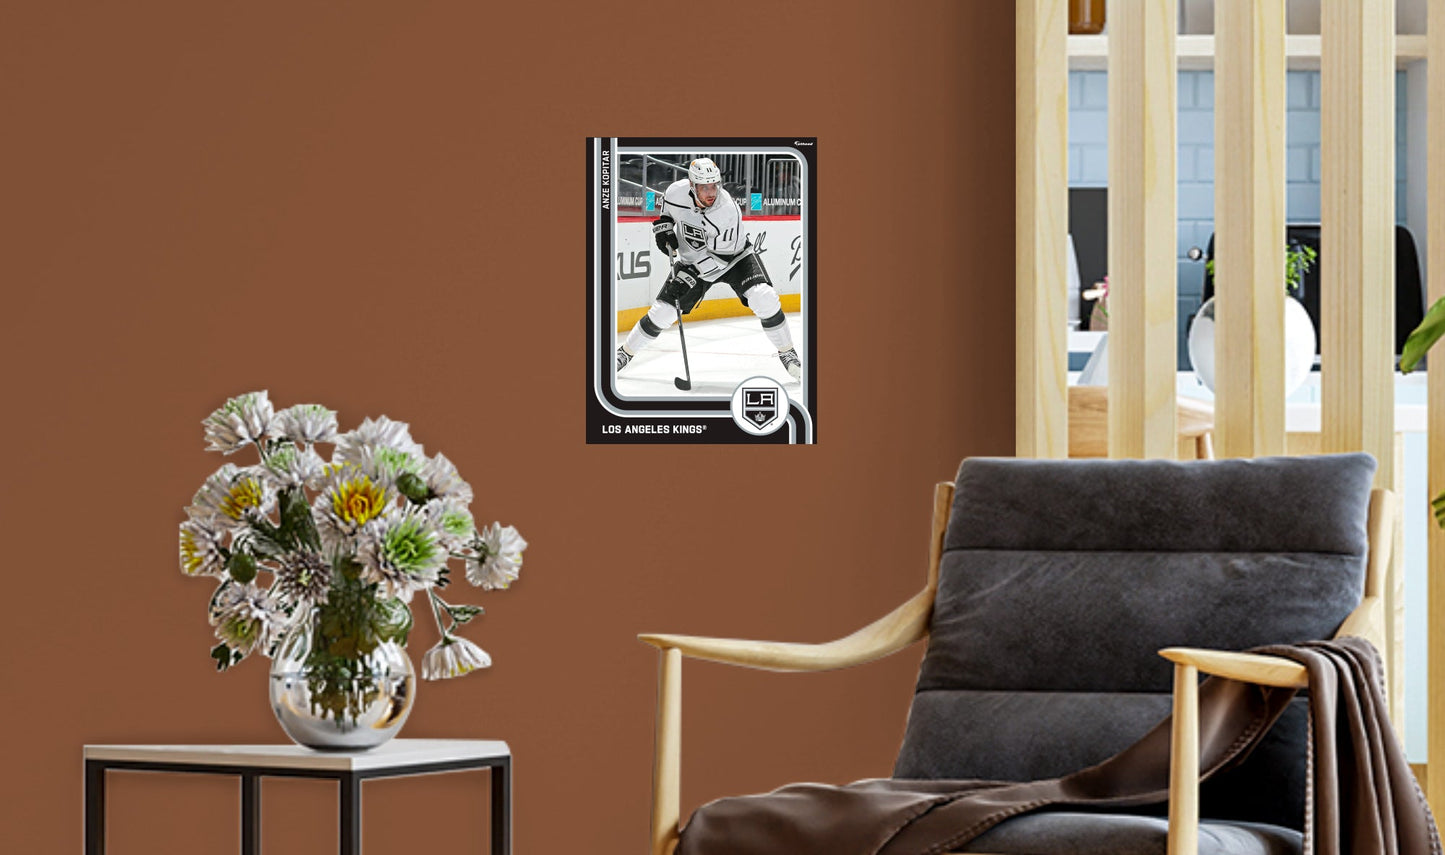 Los Angeles Kings: Anze Kopitar Poster - Officially Licensed NHL Removable Adhesive Decal